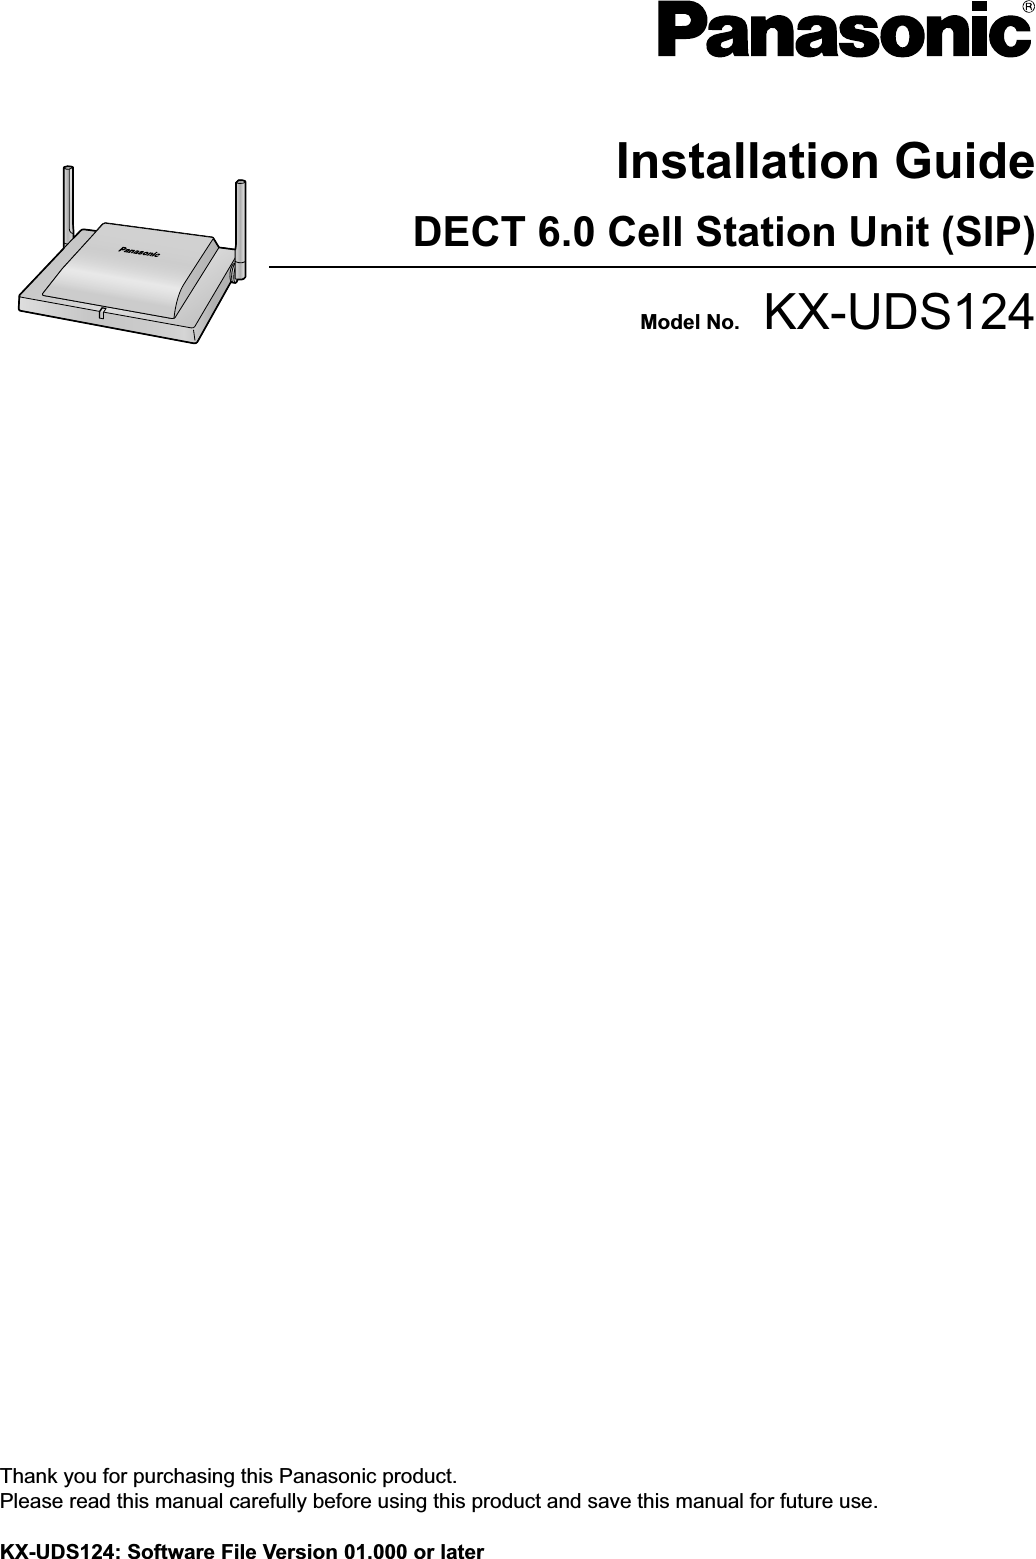 Model No.    KX-UDS124DECT 6.0 Cell Station Unit (SIP)Installation GuideThank you for purchasing this Panasonic product. Please read this manual carefully before using this product and save this manual for future use.KX-UDS124: Software File Version 01.000 or later